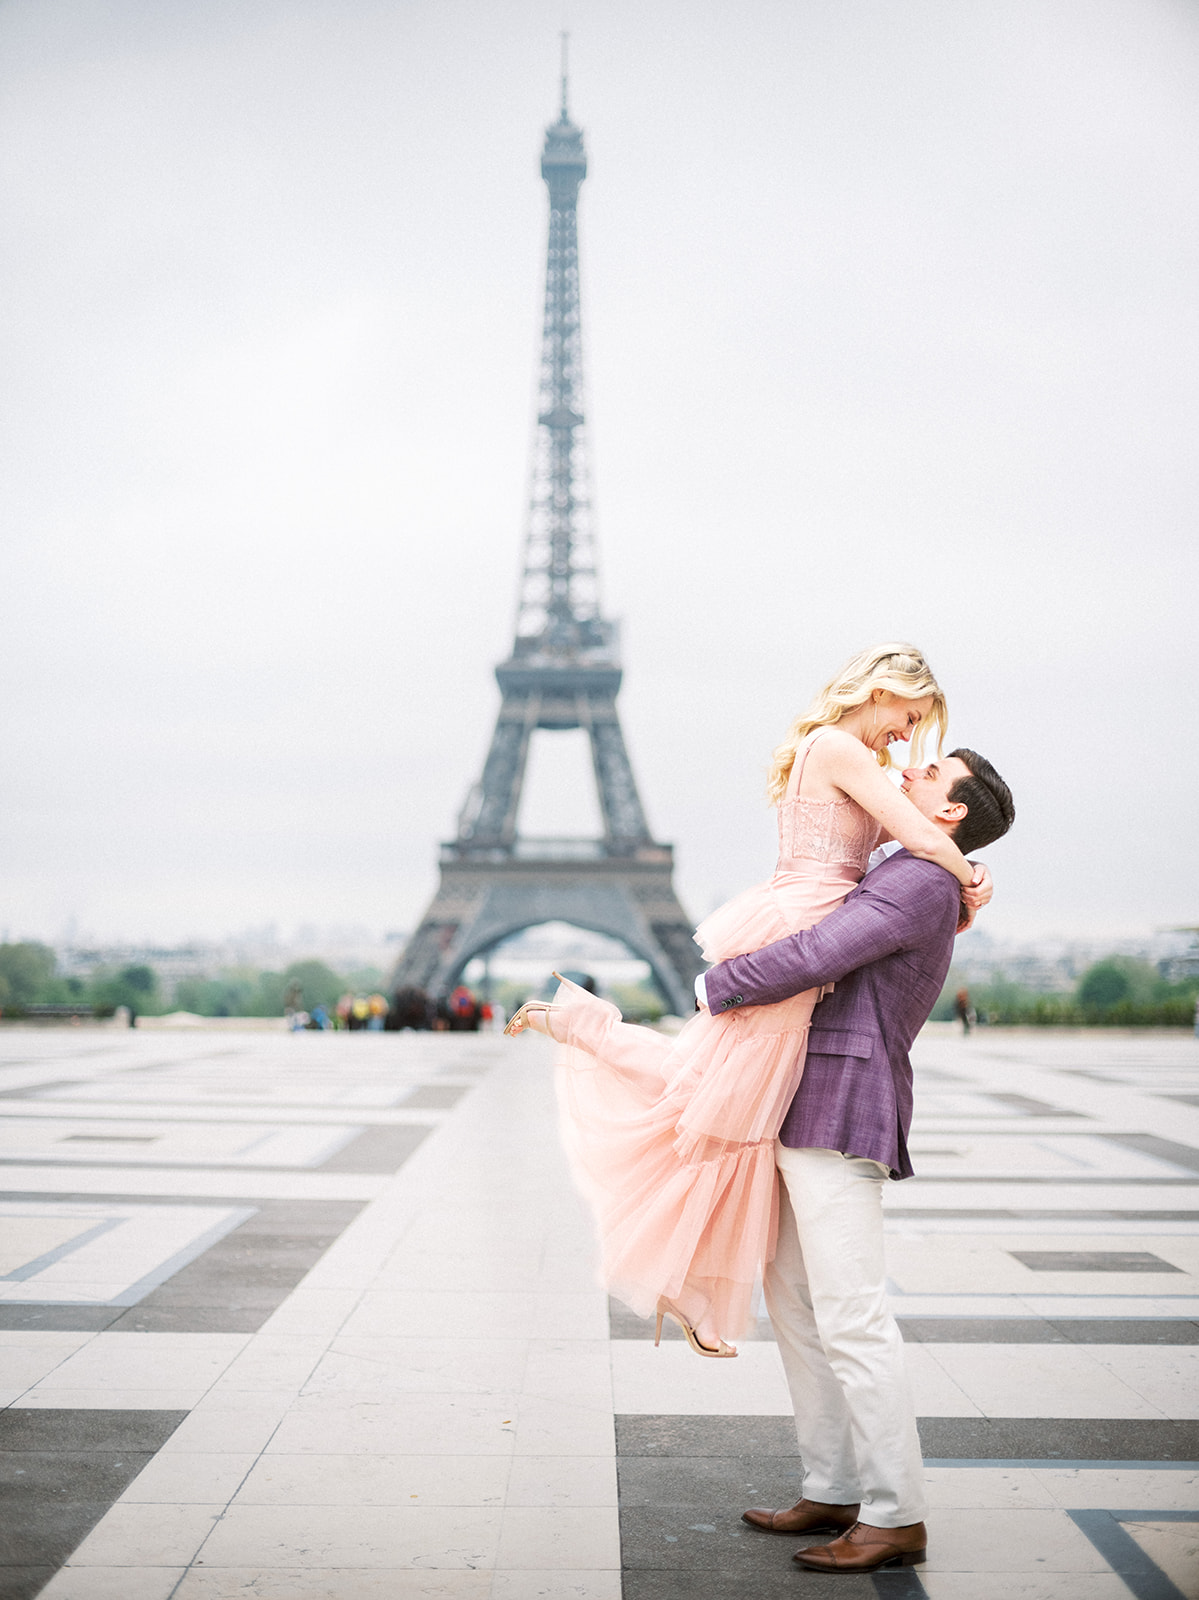 Man picks up woman in front of the Eiffel Tower as he looks at her.